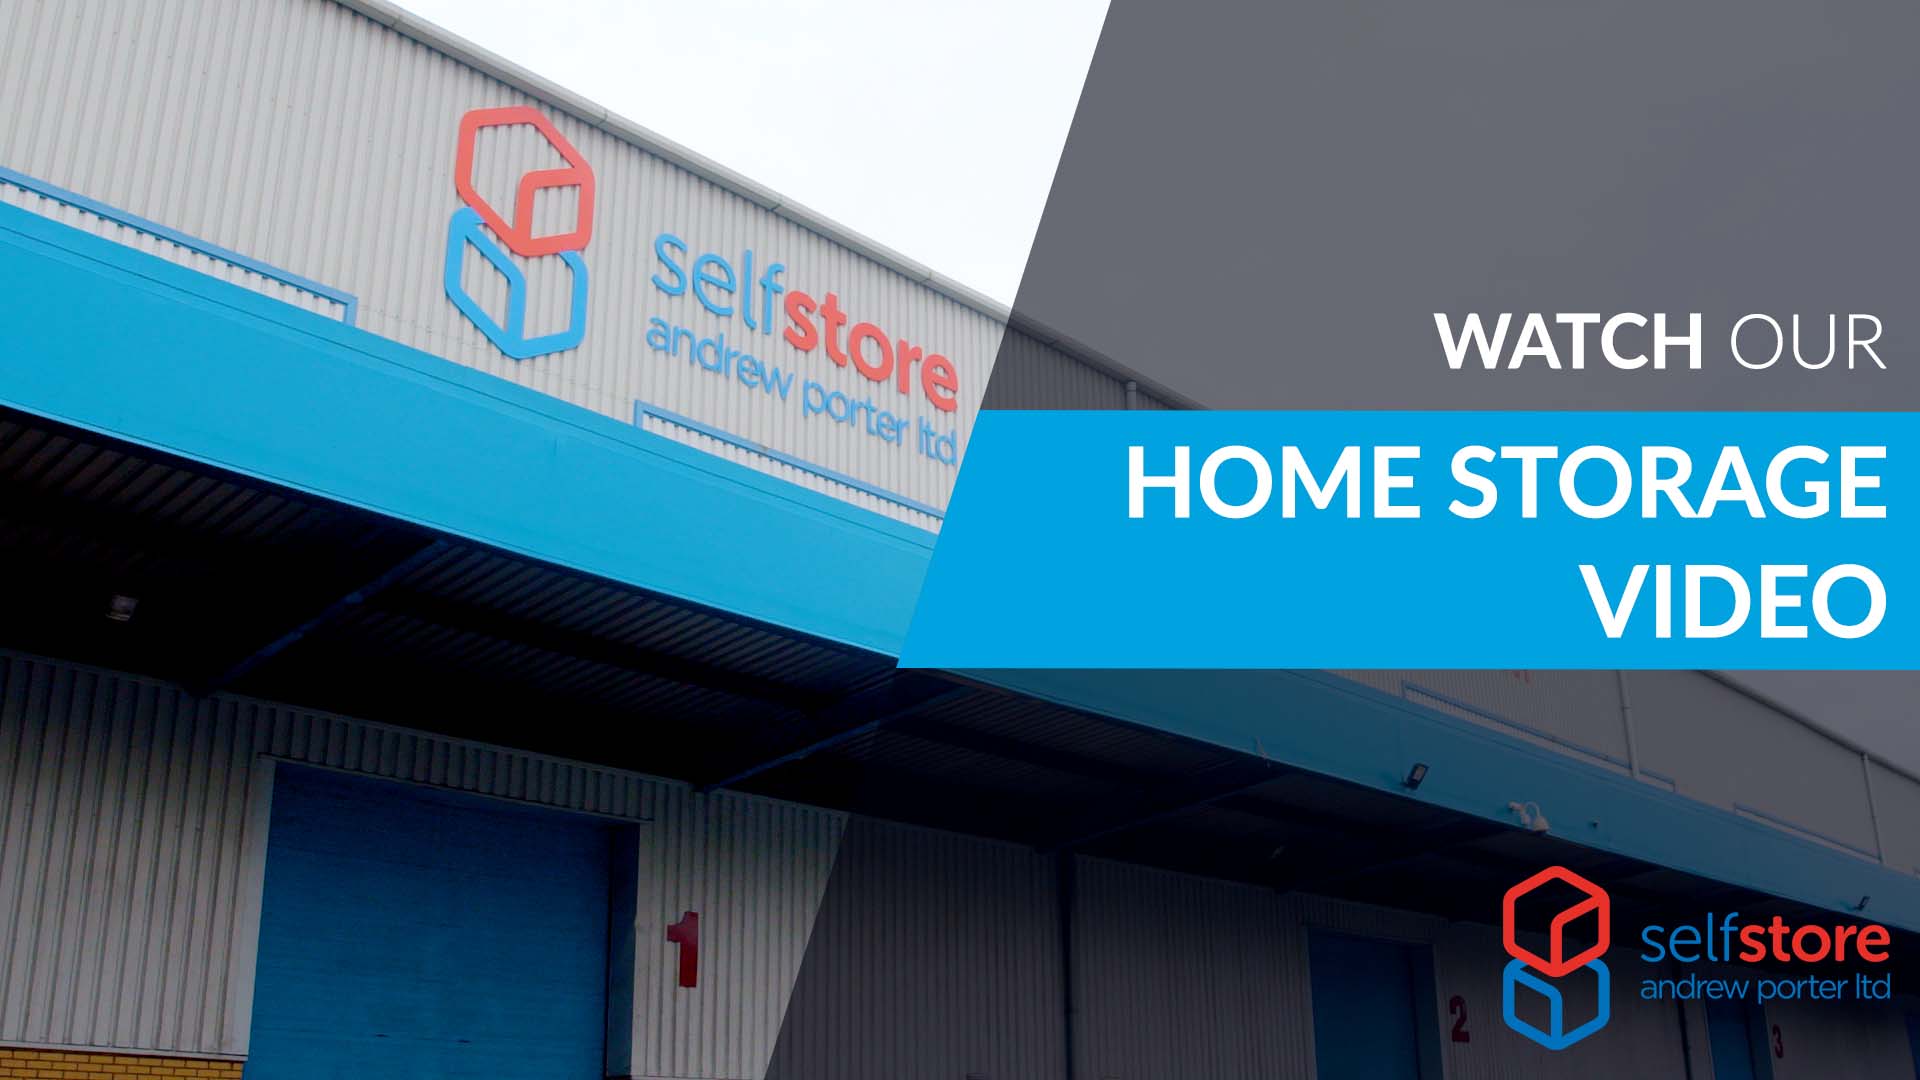 Self storage for home customers